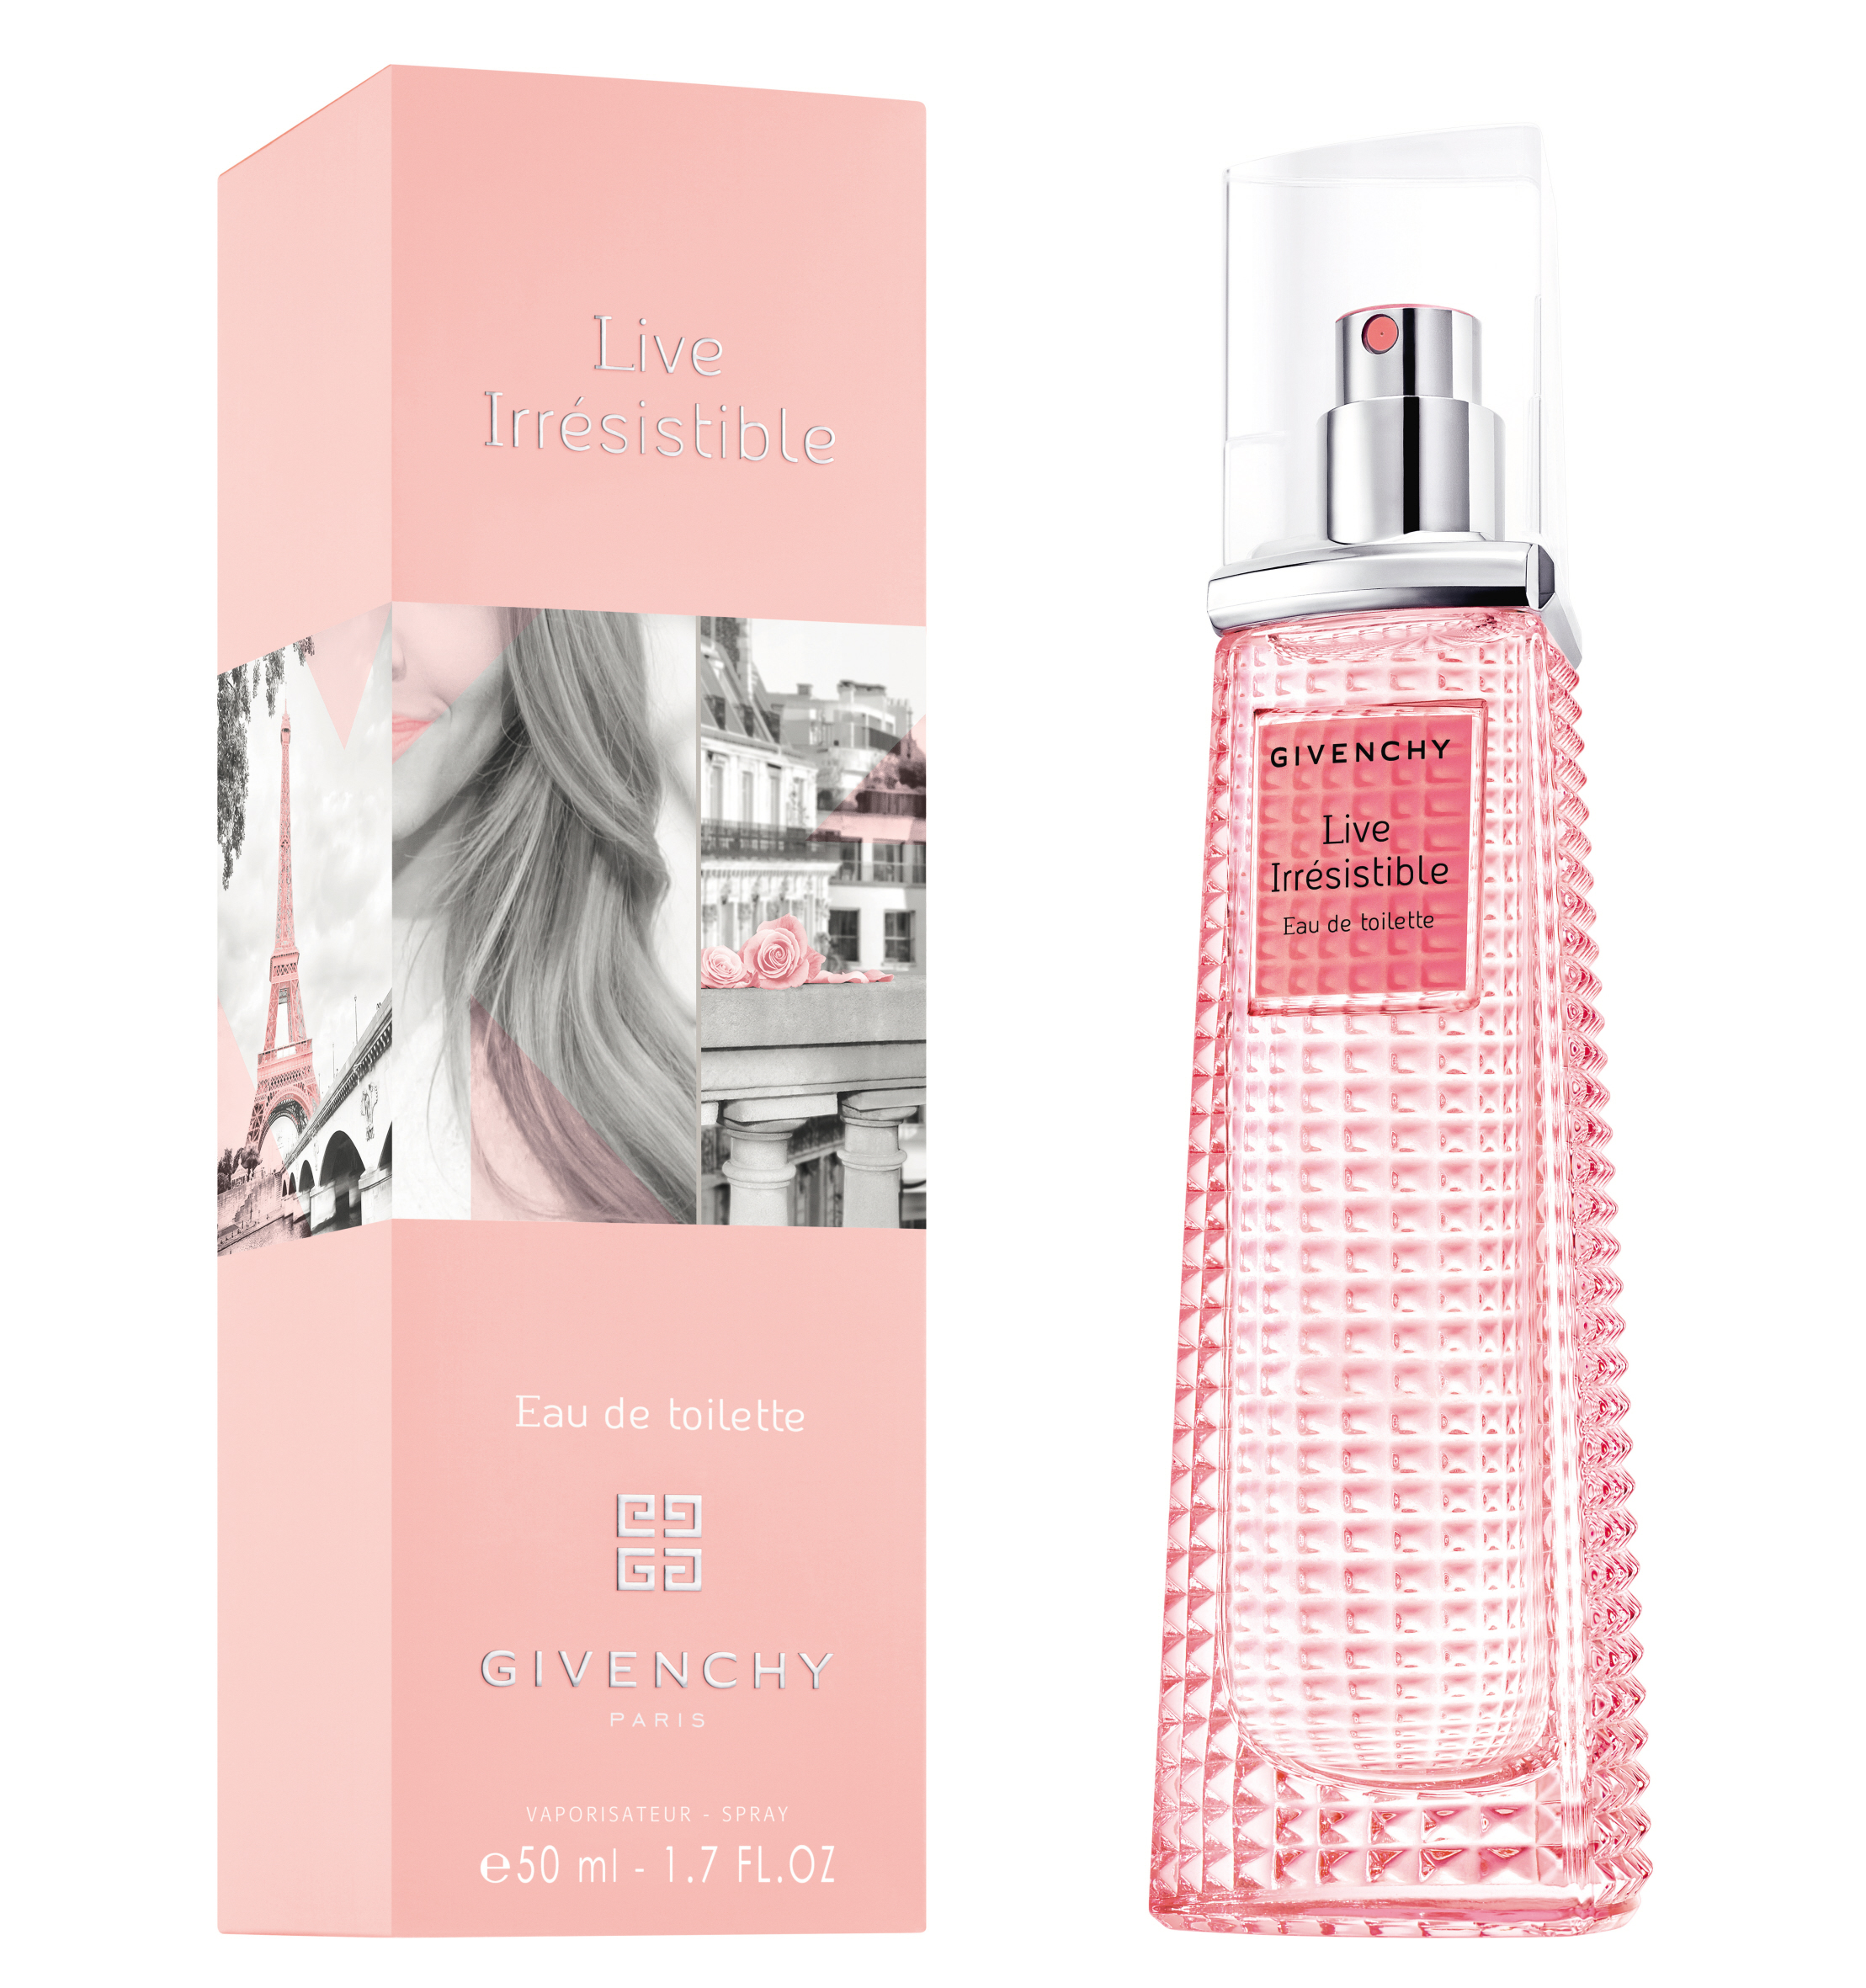 Givenchy irresistible toilette. Givenchy Live irresistible Eau de Toilette. Духи живанши Givenchy Live irresistible. Духи Givenchy Live irresistible Eau de Toilette 75. Givenchy Live irresistible 50мл.